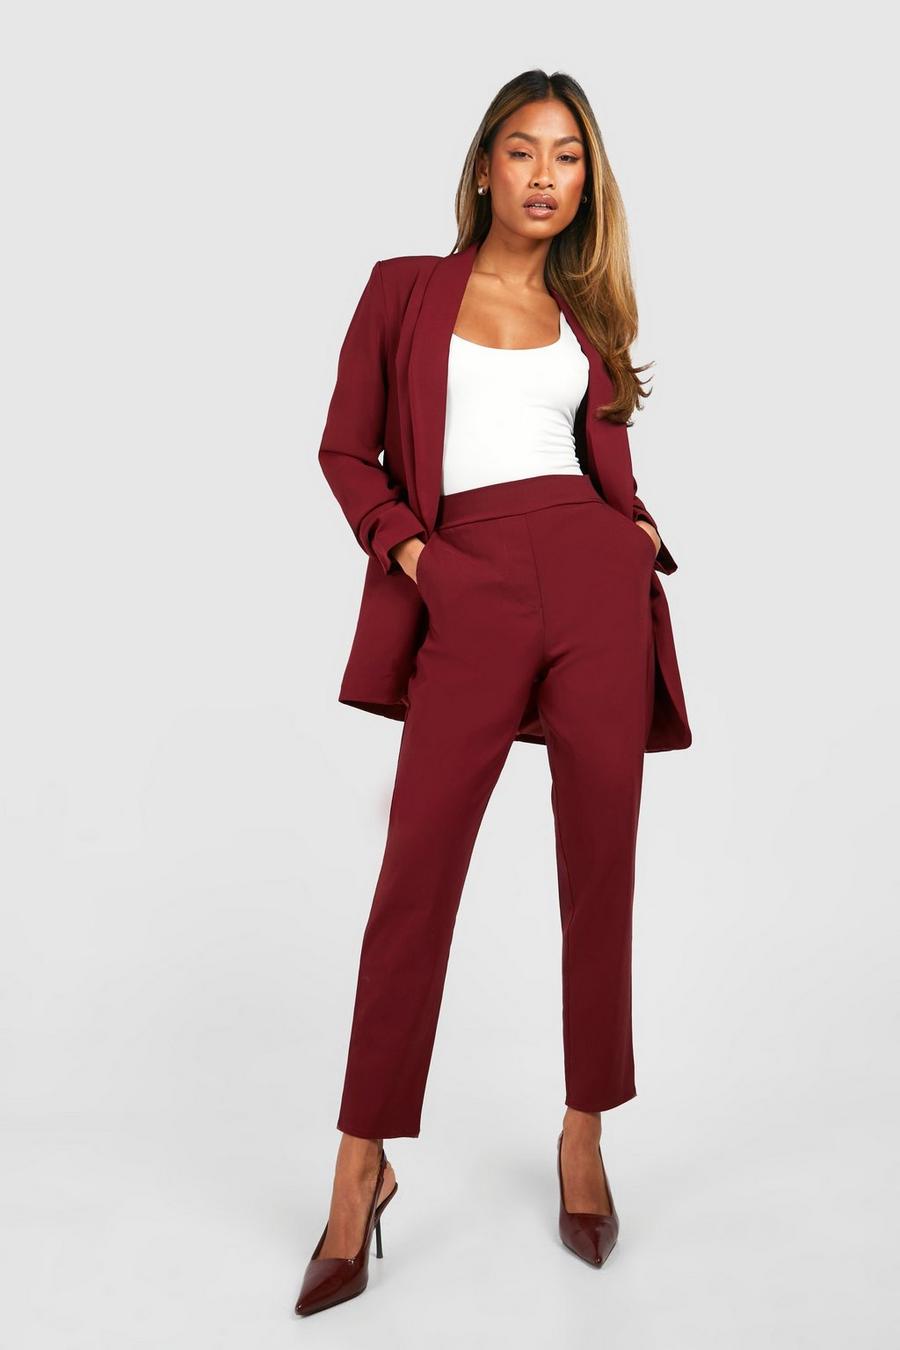 The Best Trouser Suits For Female Wedding Guests